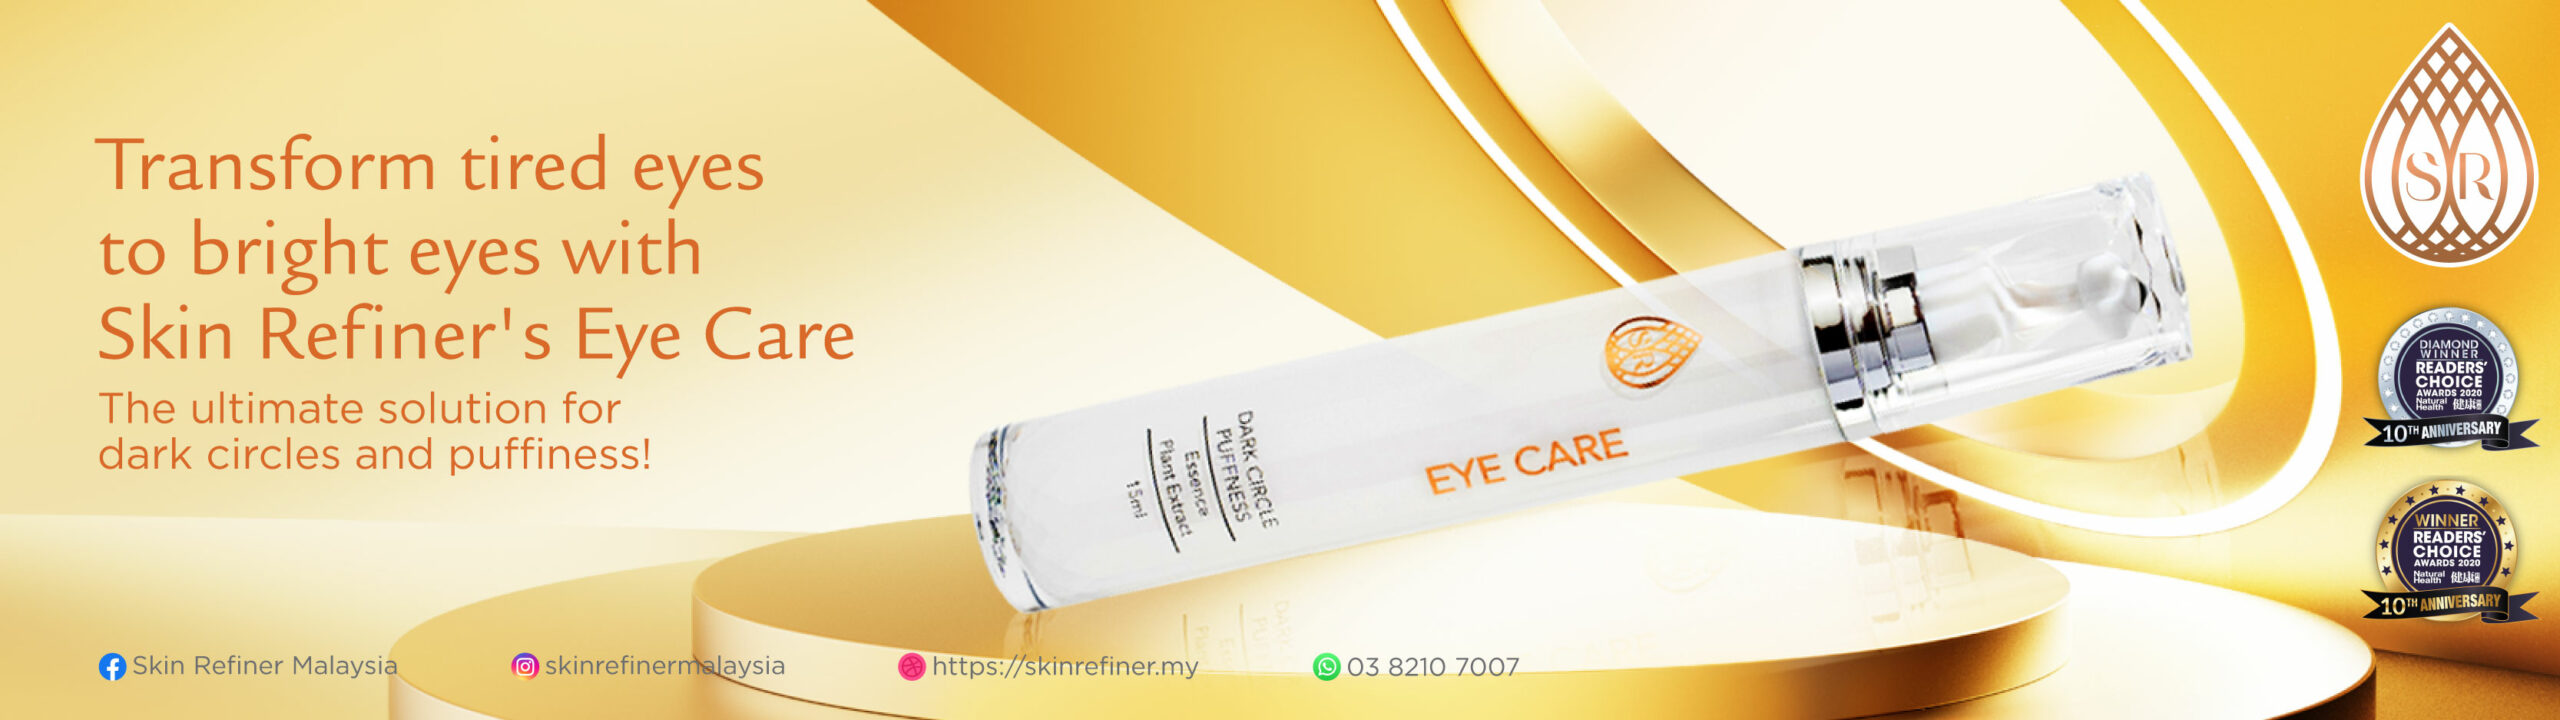 Say Hello to Bright Eyes with Skin Refiner Eye Care